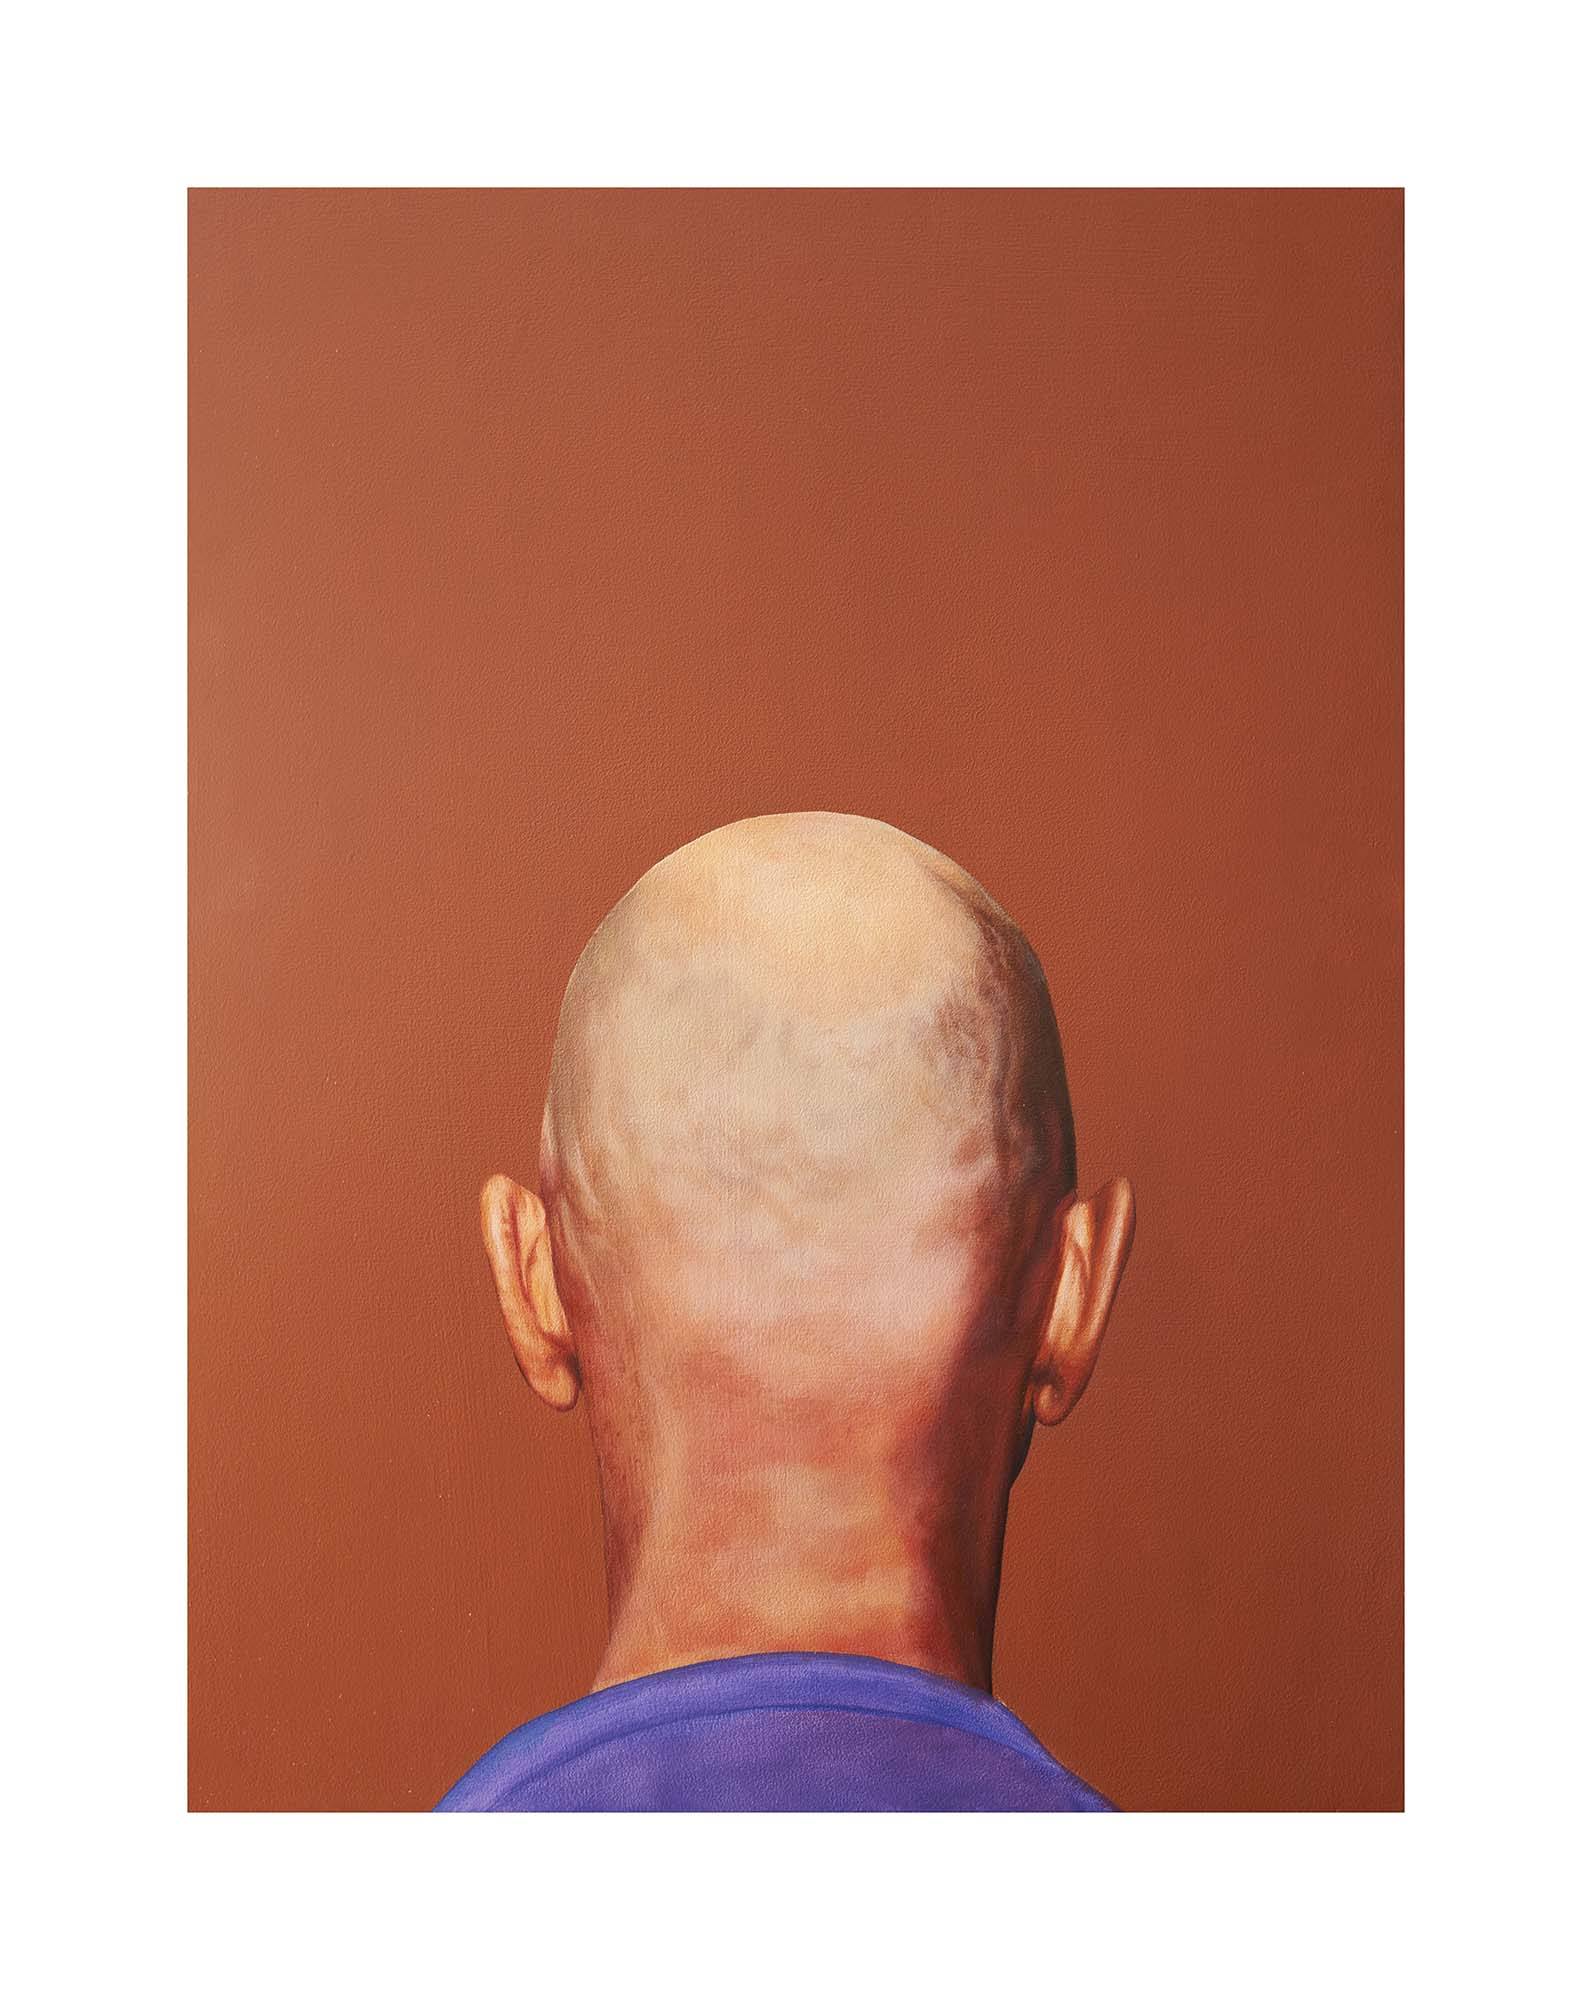 Head 1, Oil on Wood Panel, 24 x 18 x 2 inches, 2020